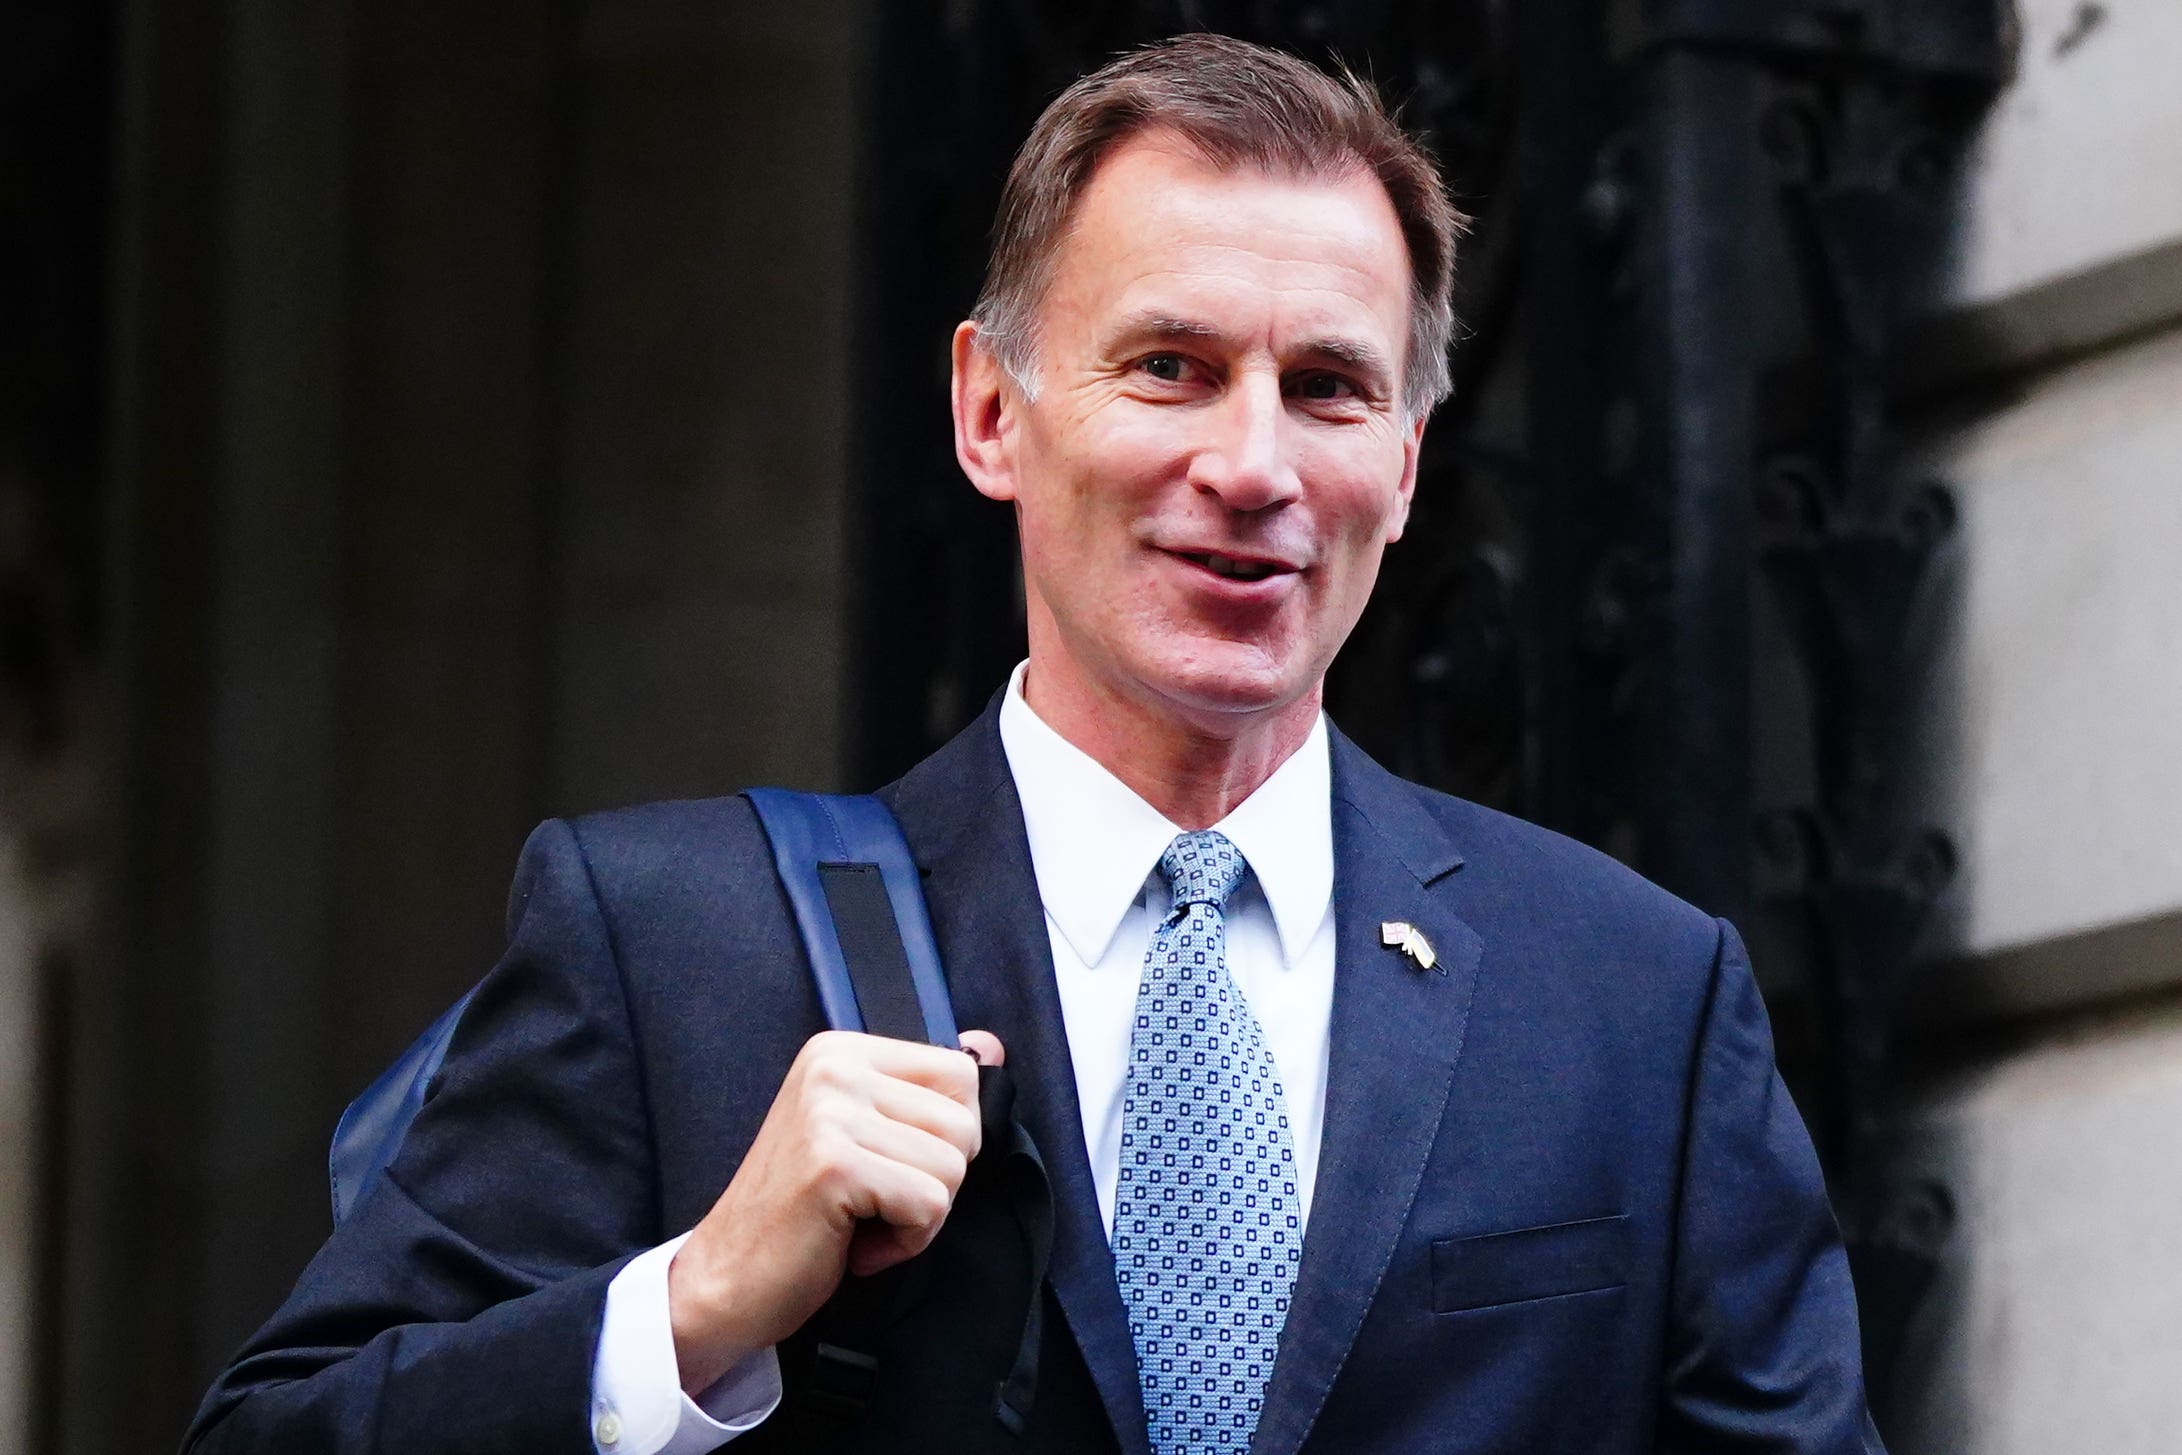 Chancellor Jeremy Hunt is looking at making changes to the lifetime pensions allowance